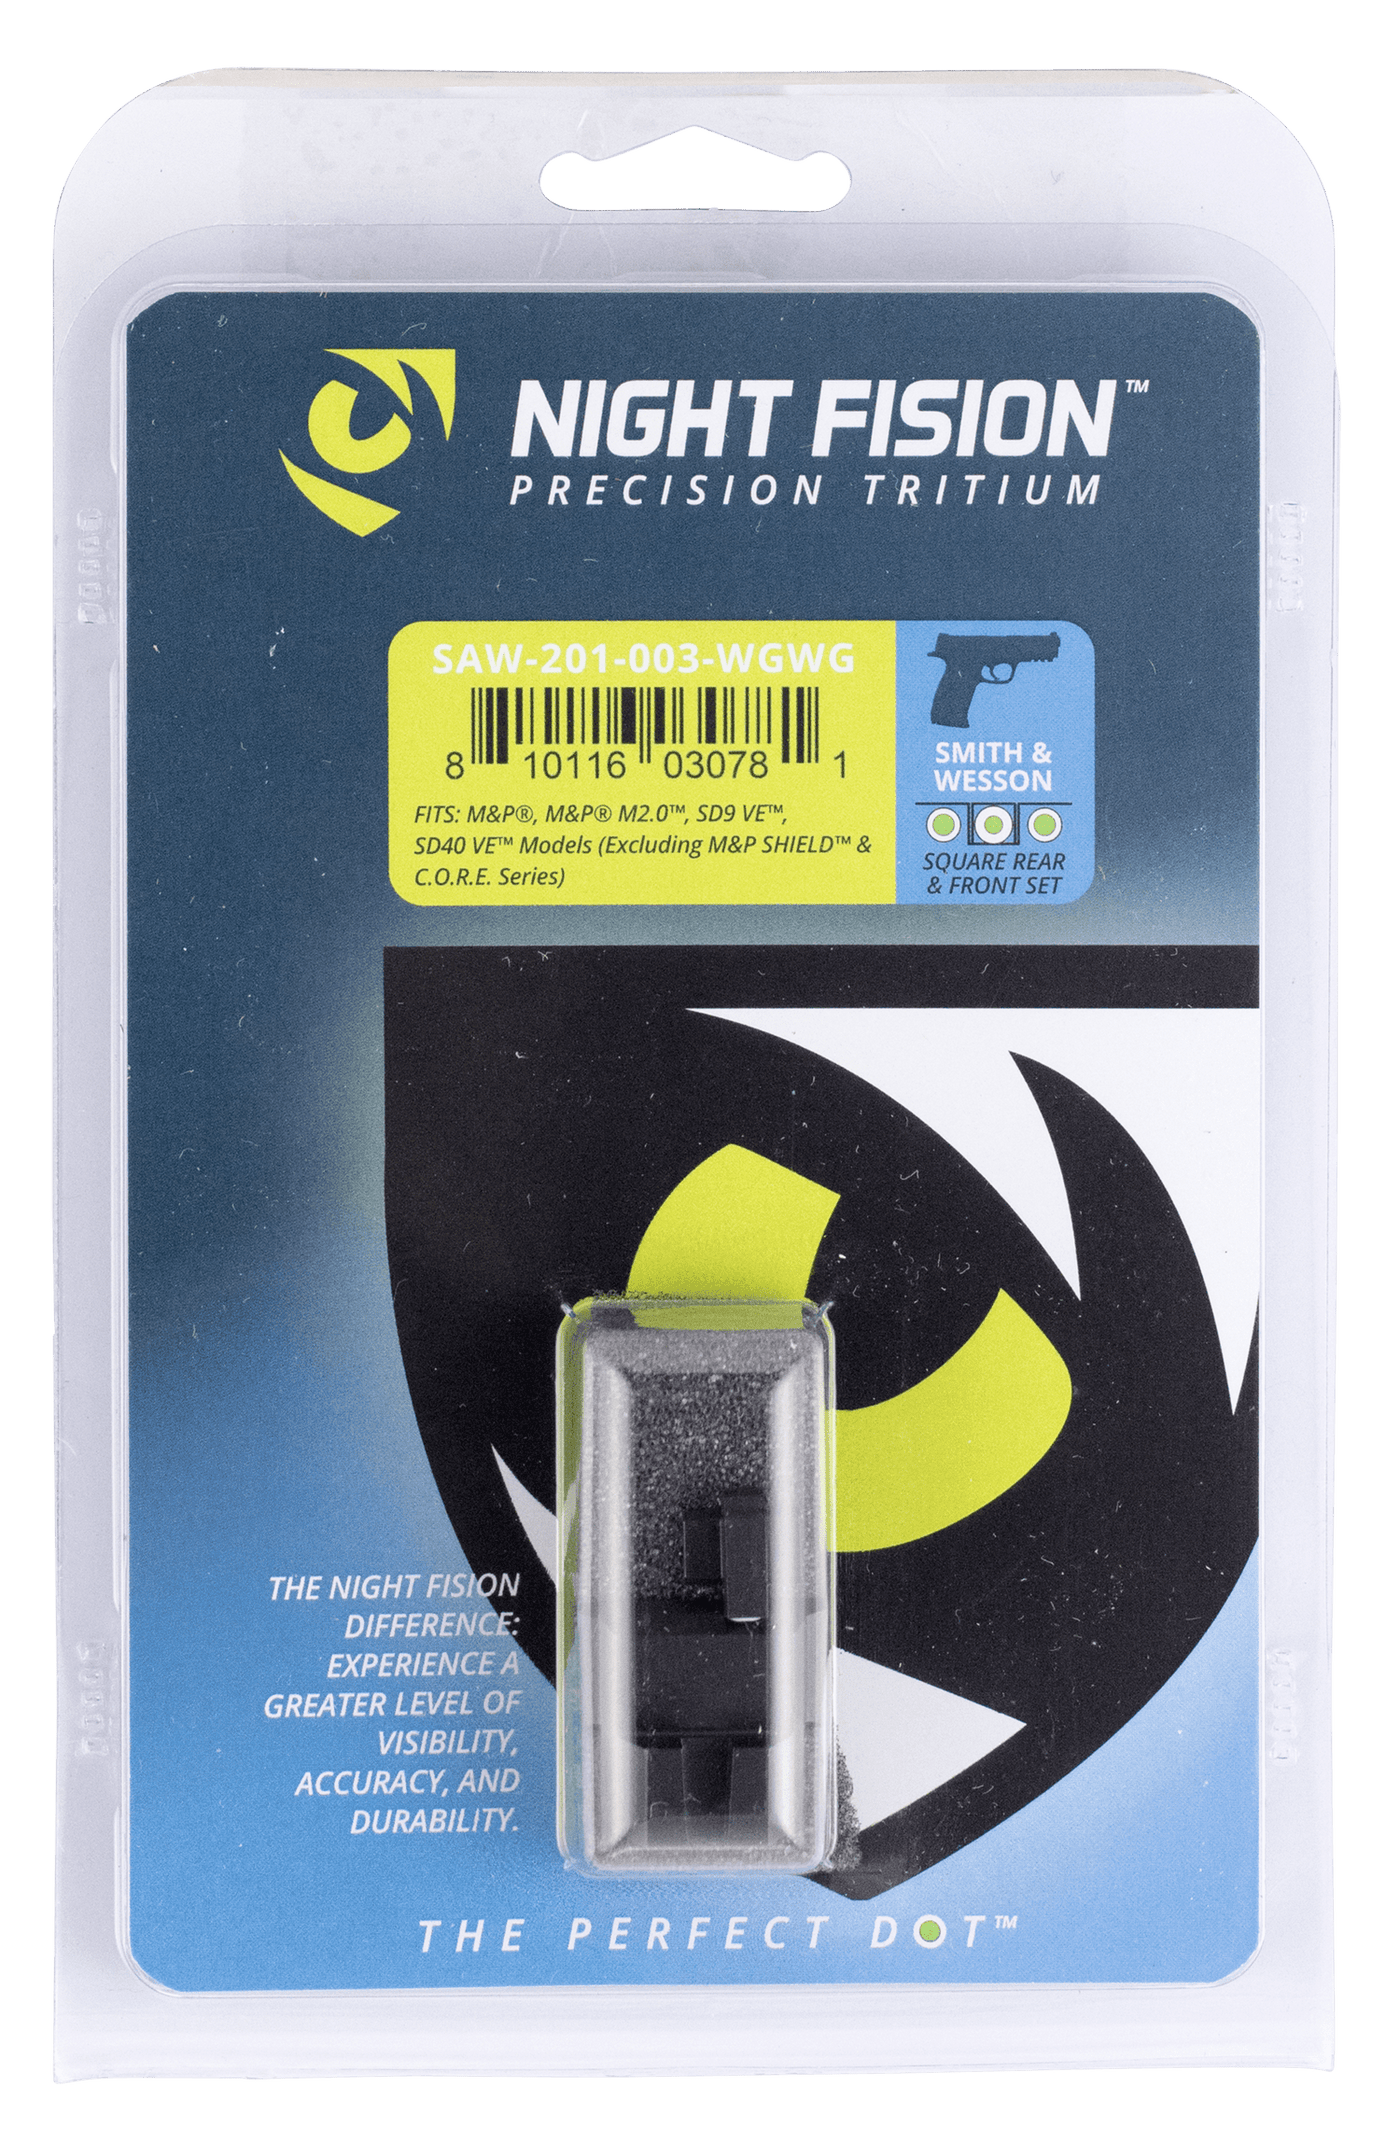 Night Fision Night Fision Oem Replacement, Nf Saw-201-003-wgwg     Ns M&p Sd9 Sd40 Ve Square Firearm Accessories